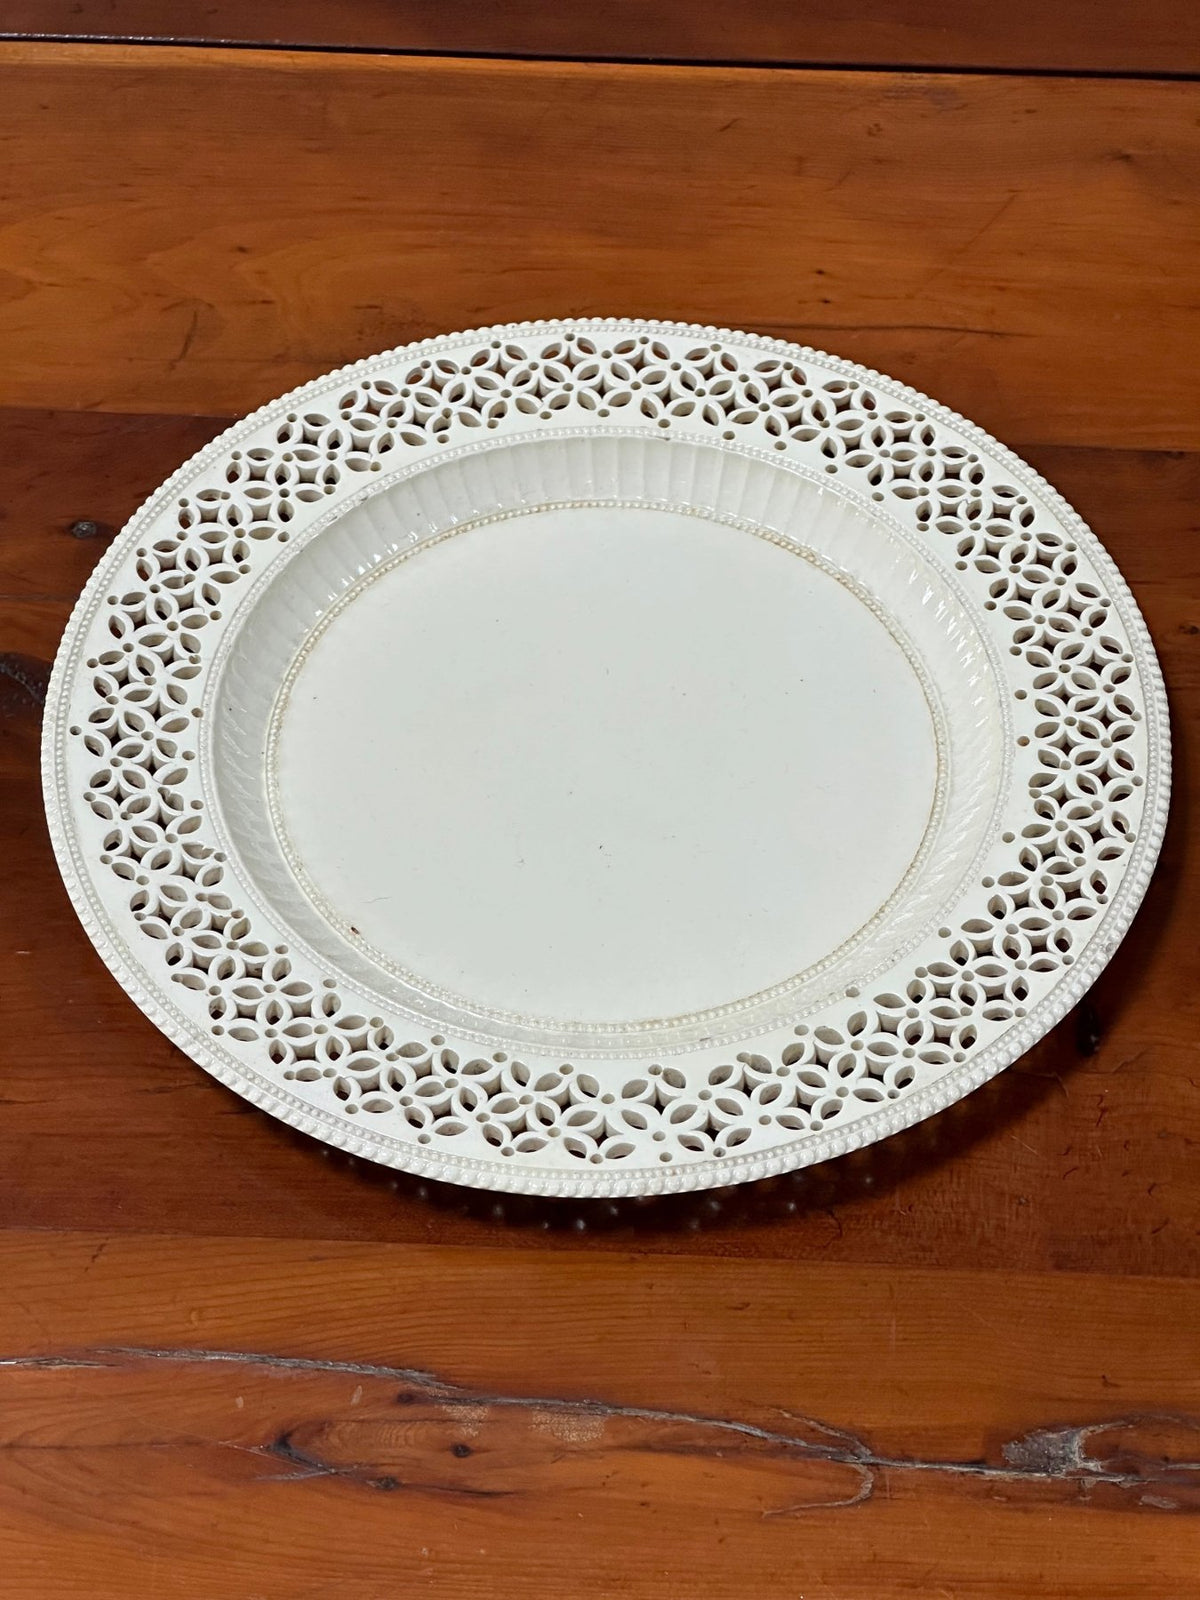 Set of Six Leeds Creamware Reticulated Plates, 18th Century - Helen Storey Antiques